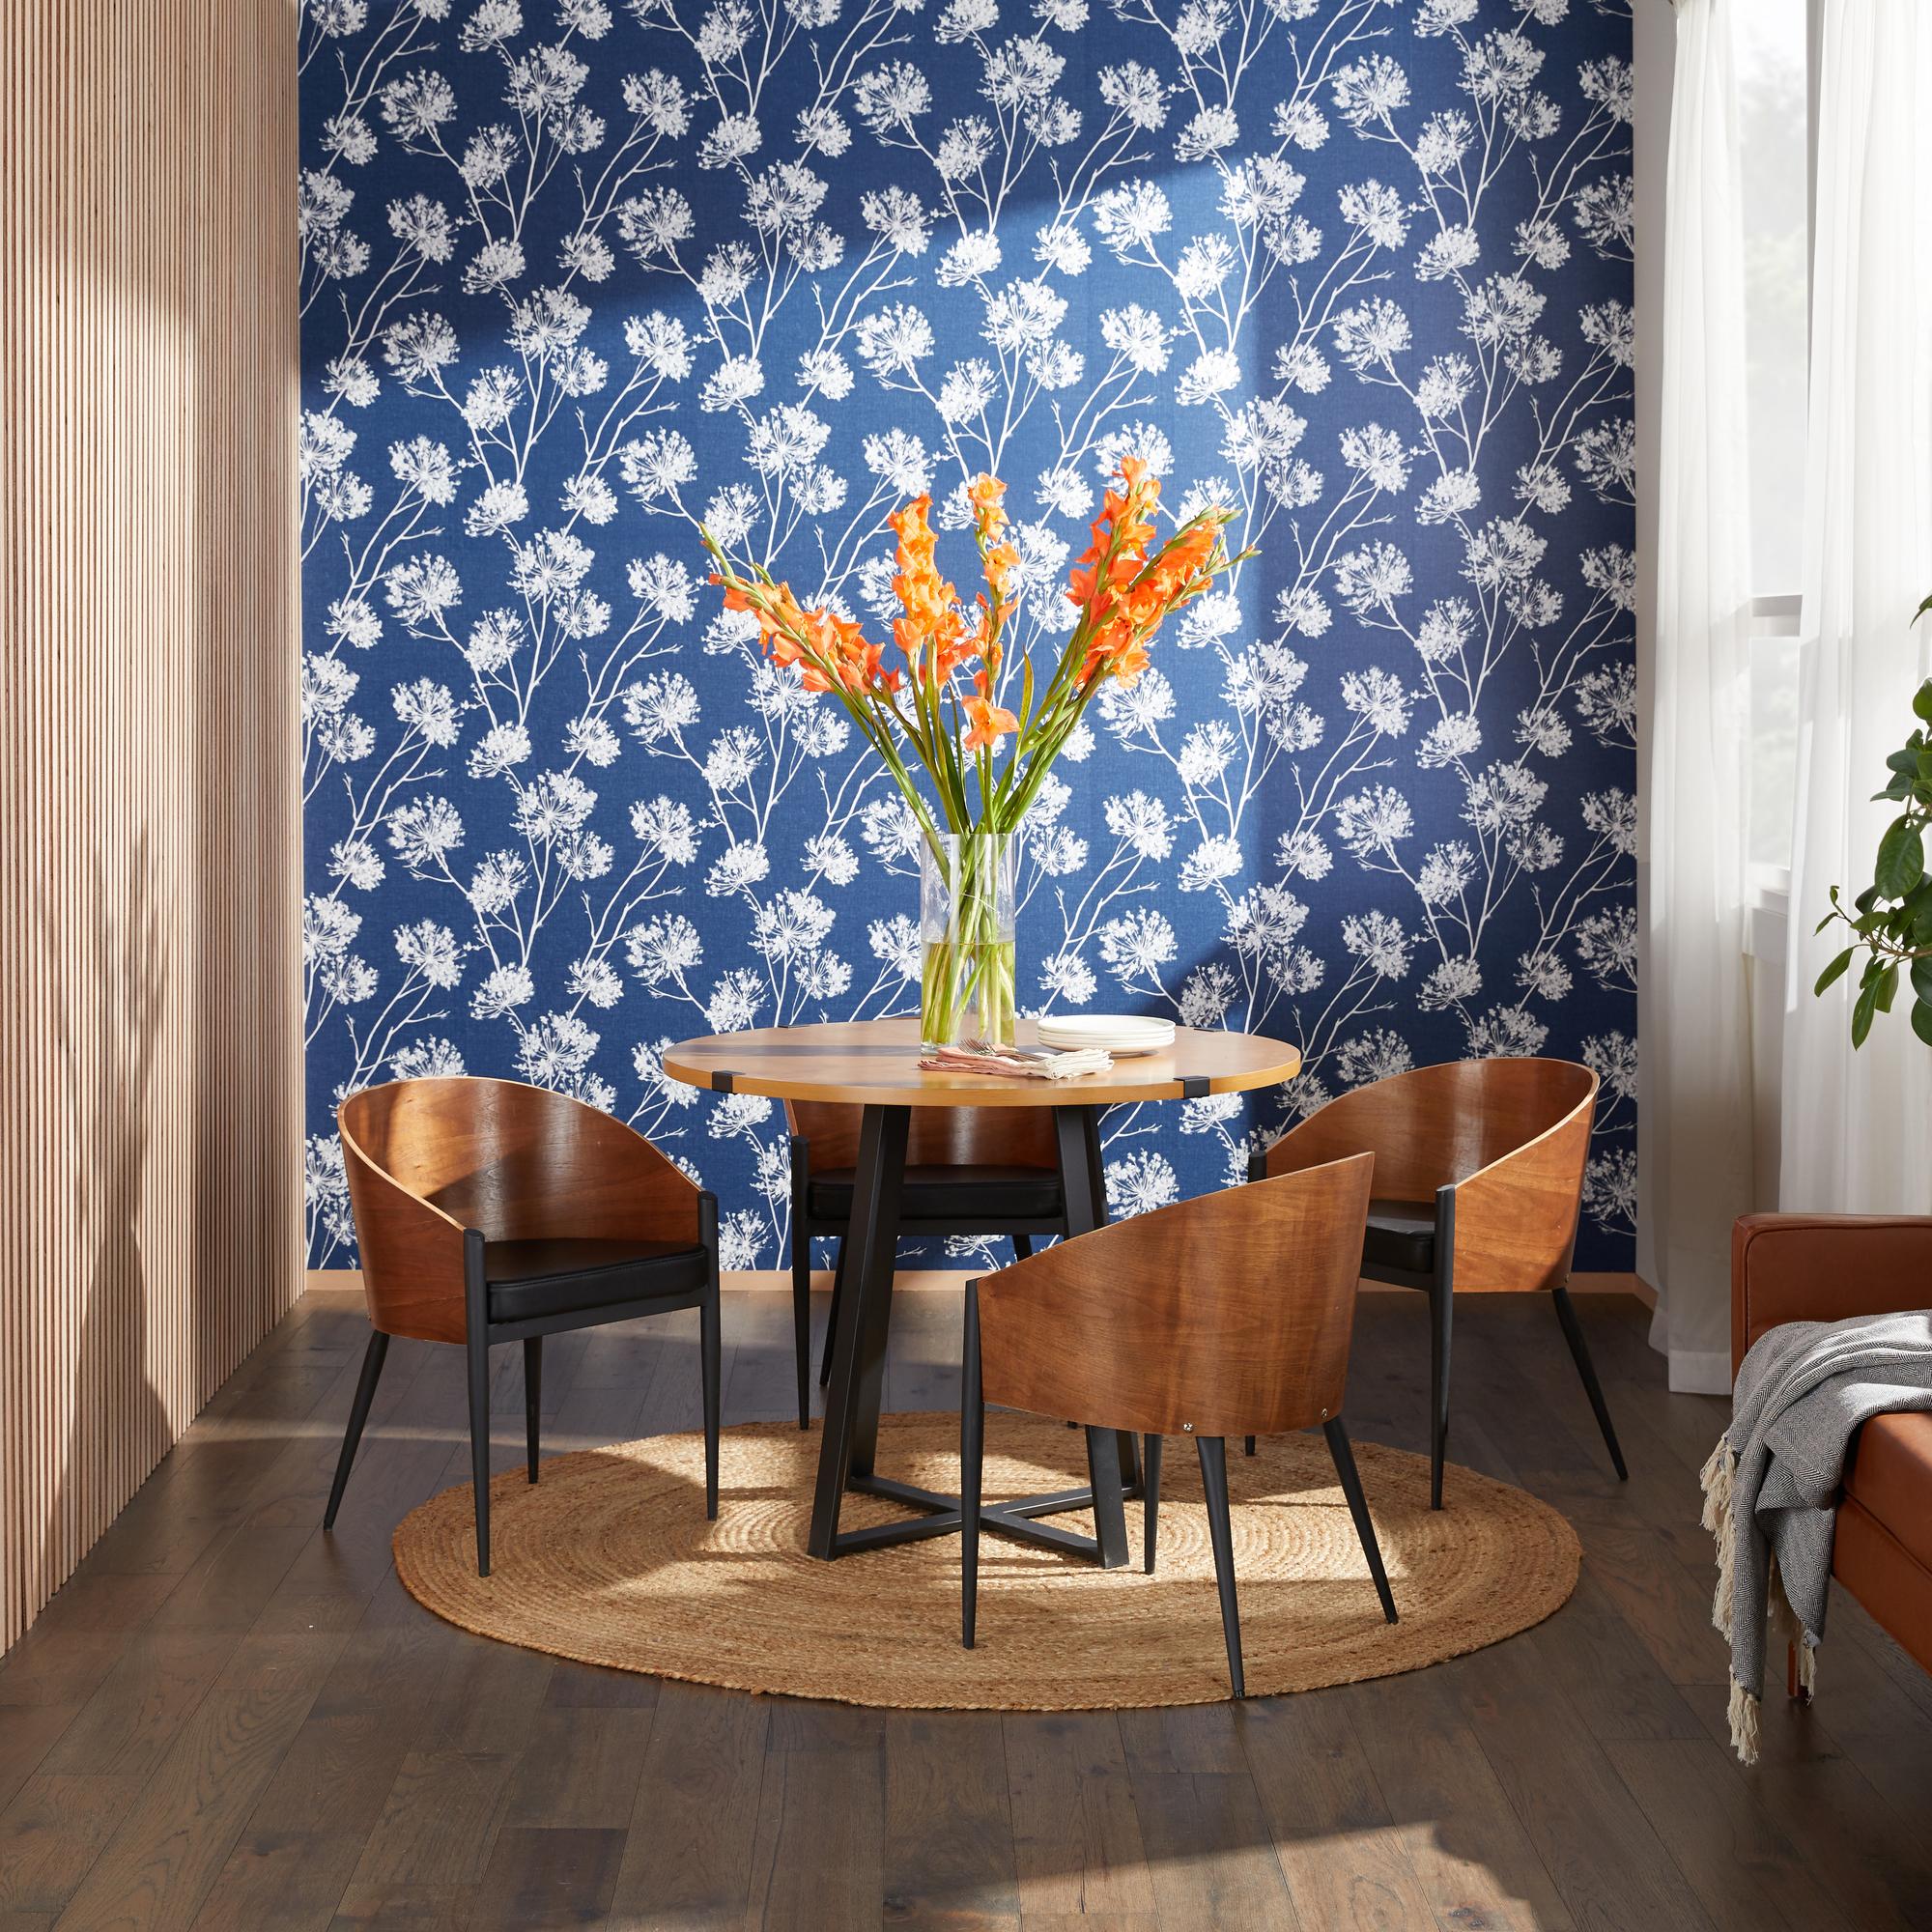 save an extra 15% on Select Dining Room Furniture*